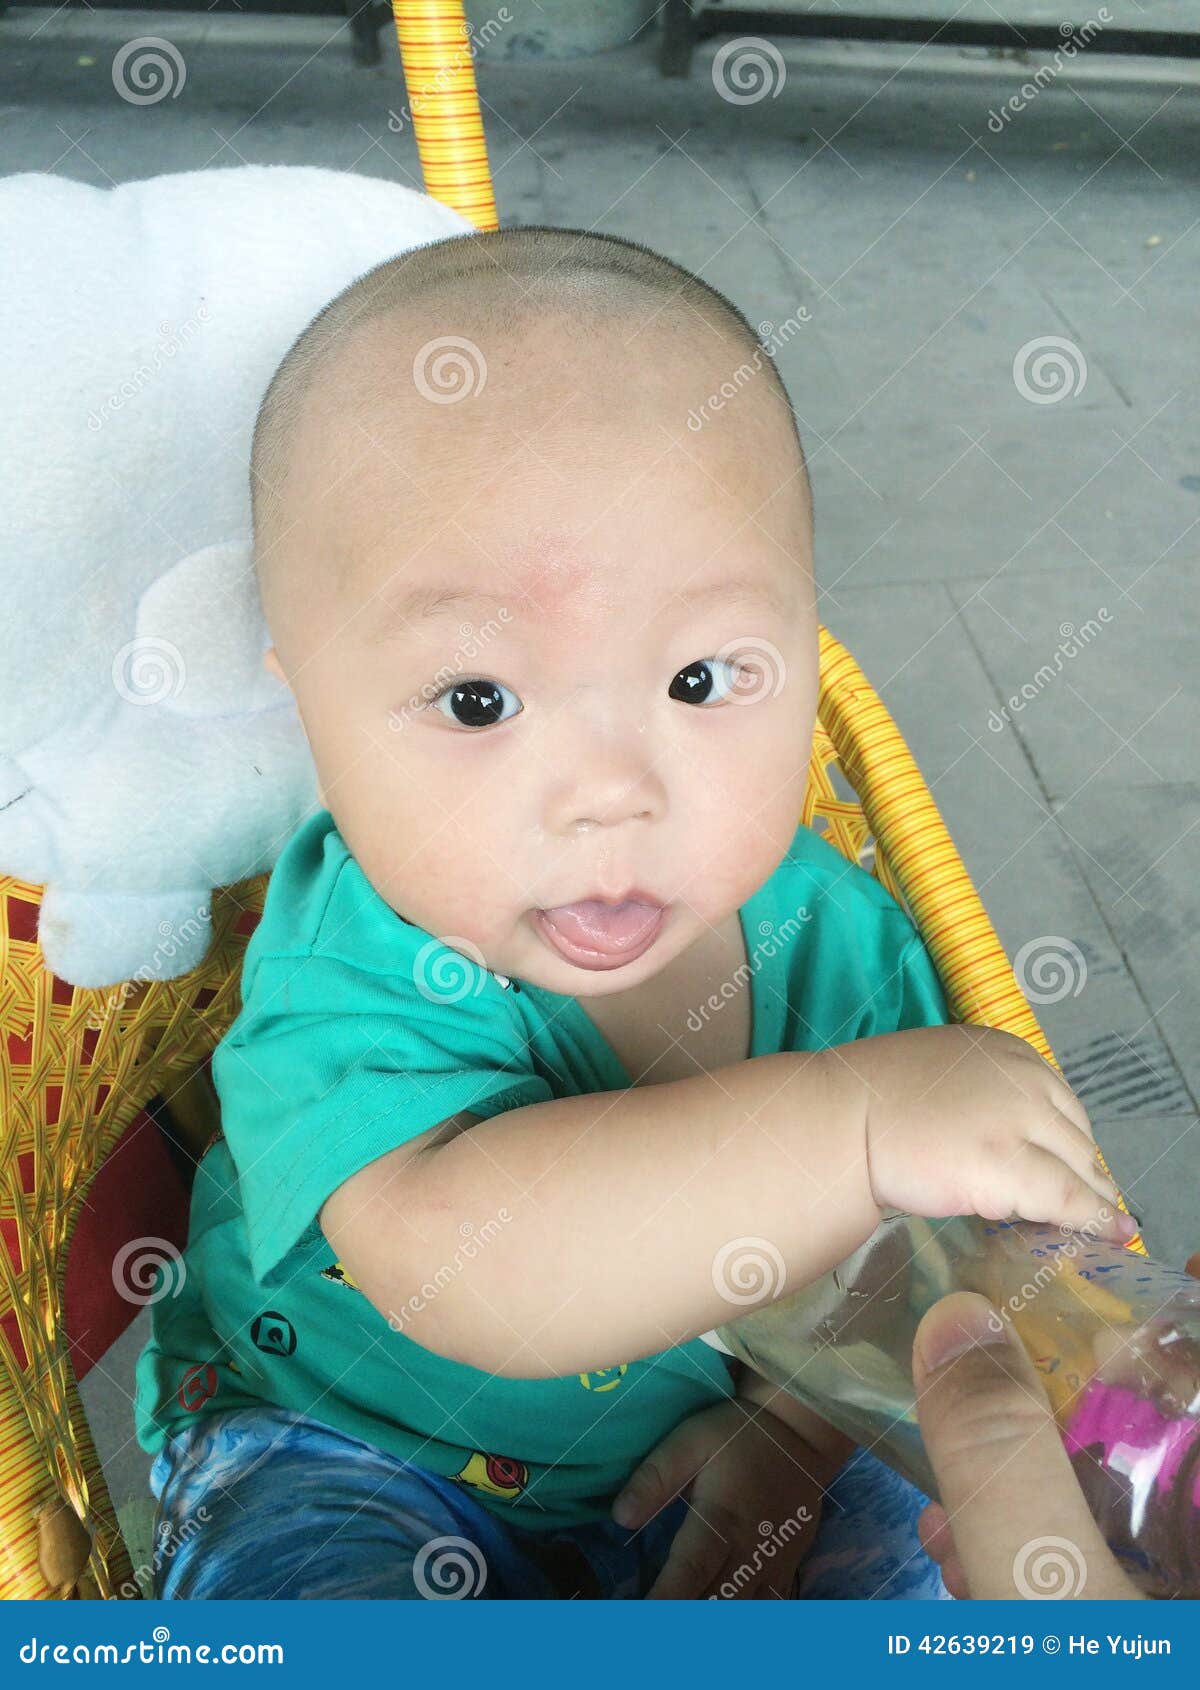 Baby being fed stock image. Image of eating, infant, touch - 42639219